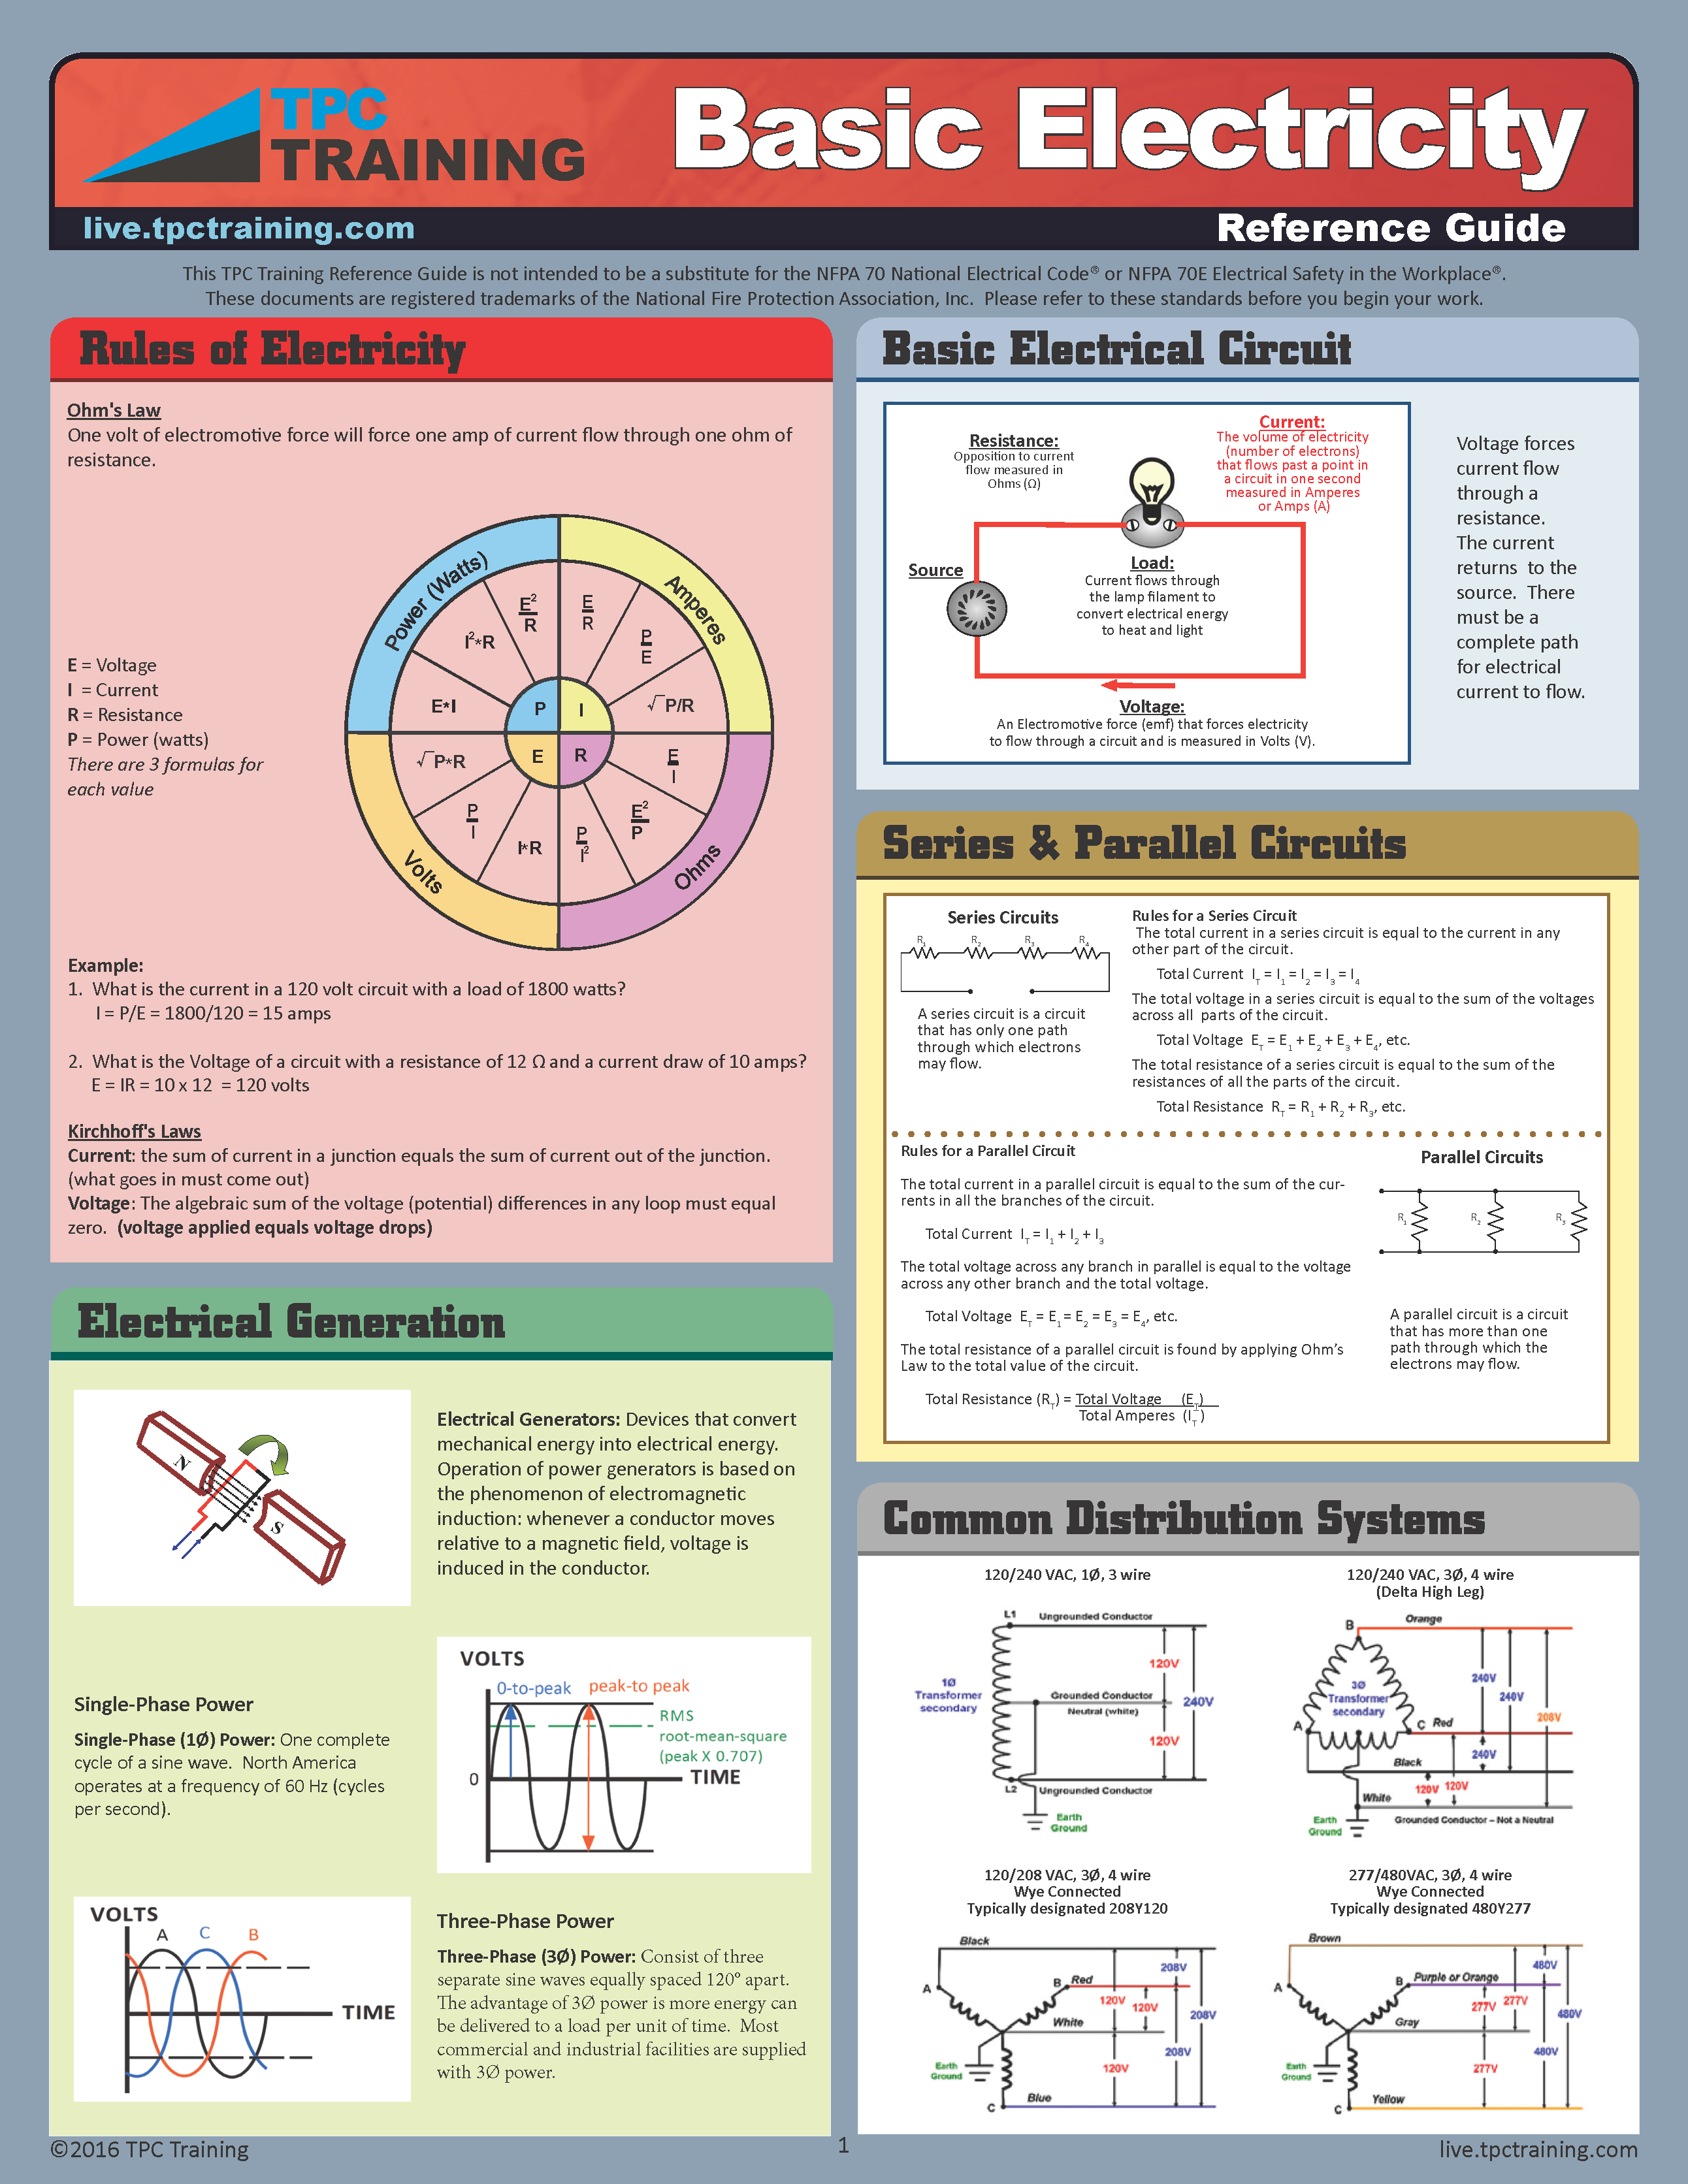 Basic Electricity Quick Reference Guide